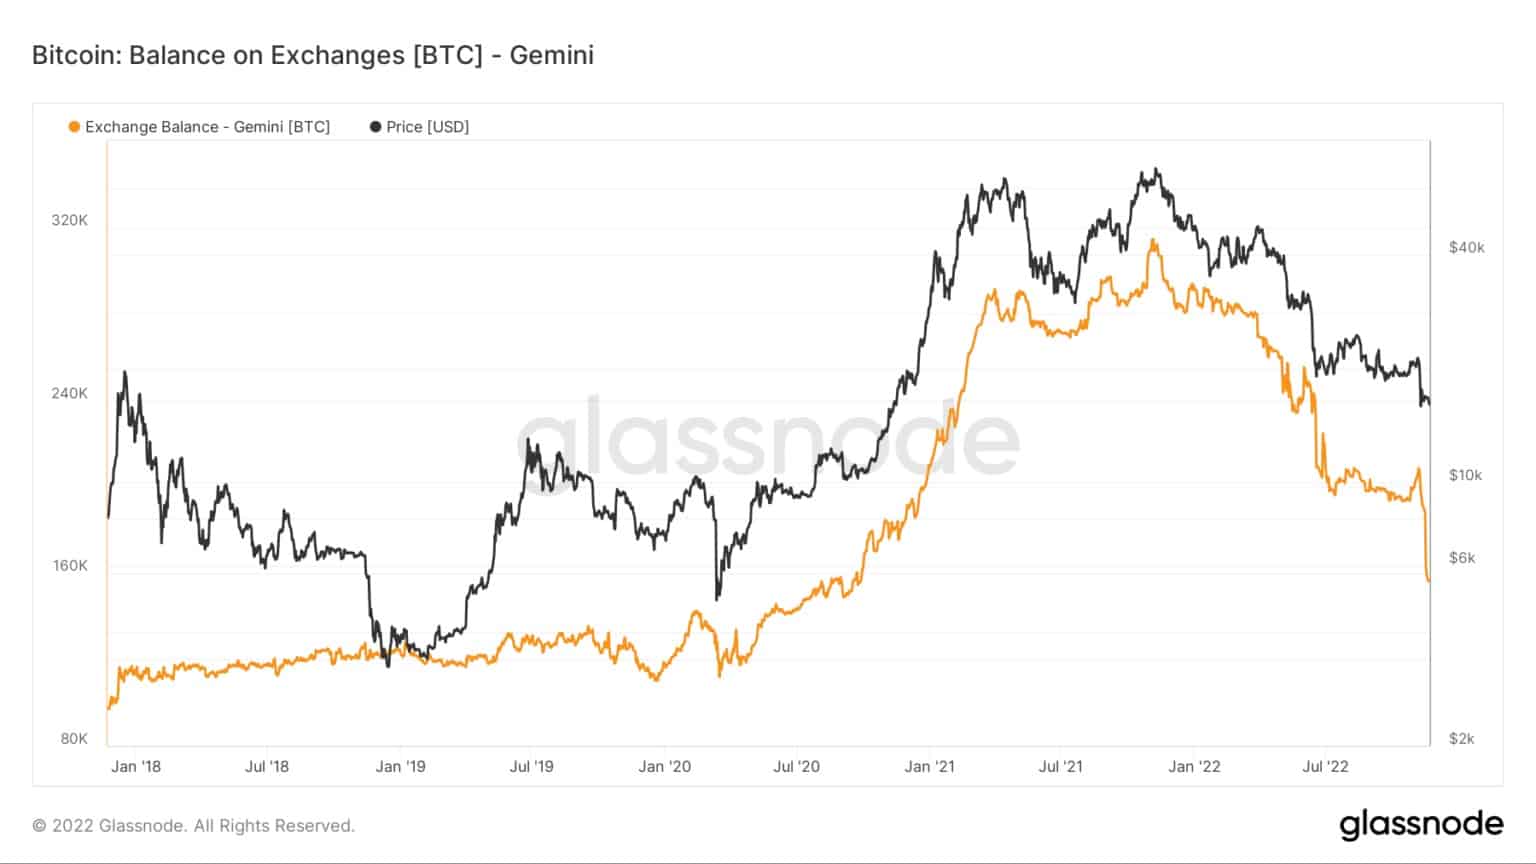 Graph showing Bitcoin balances on the Gemini exchange from 2016 to 2022 (Source: Glassnode)